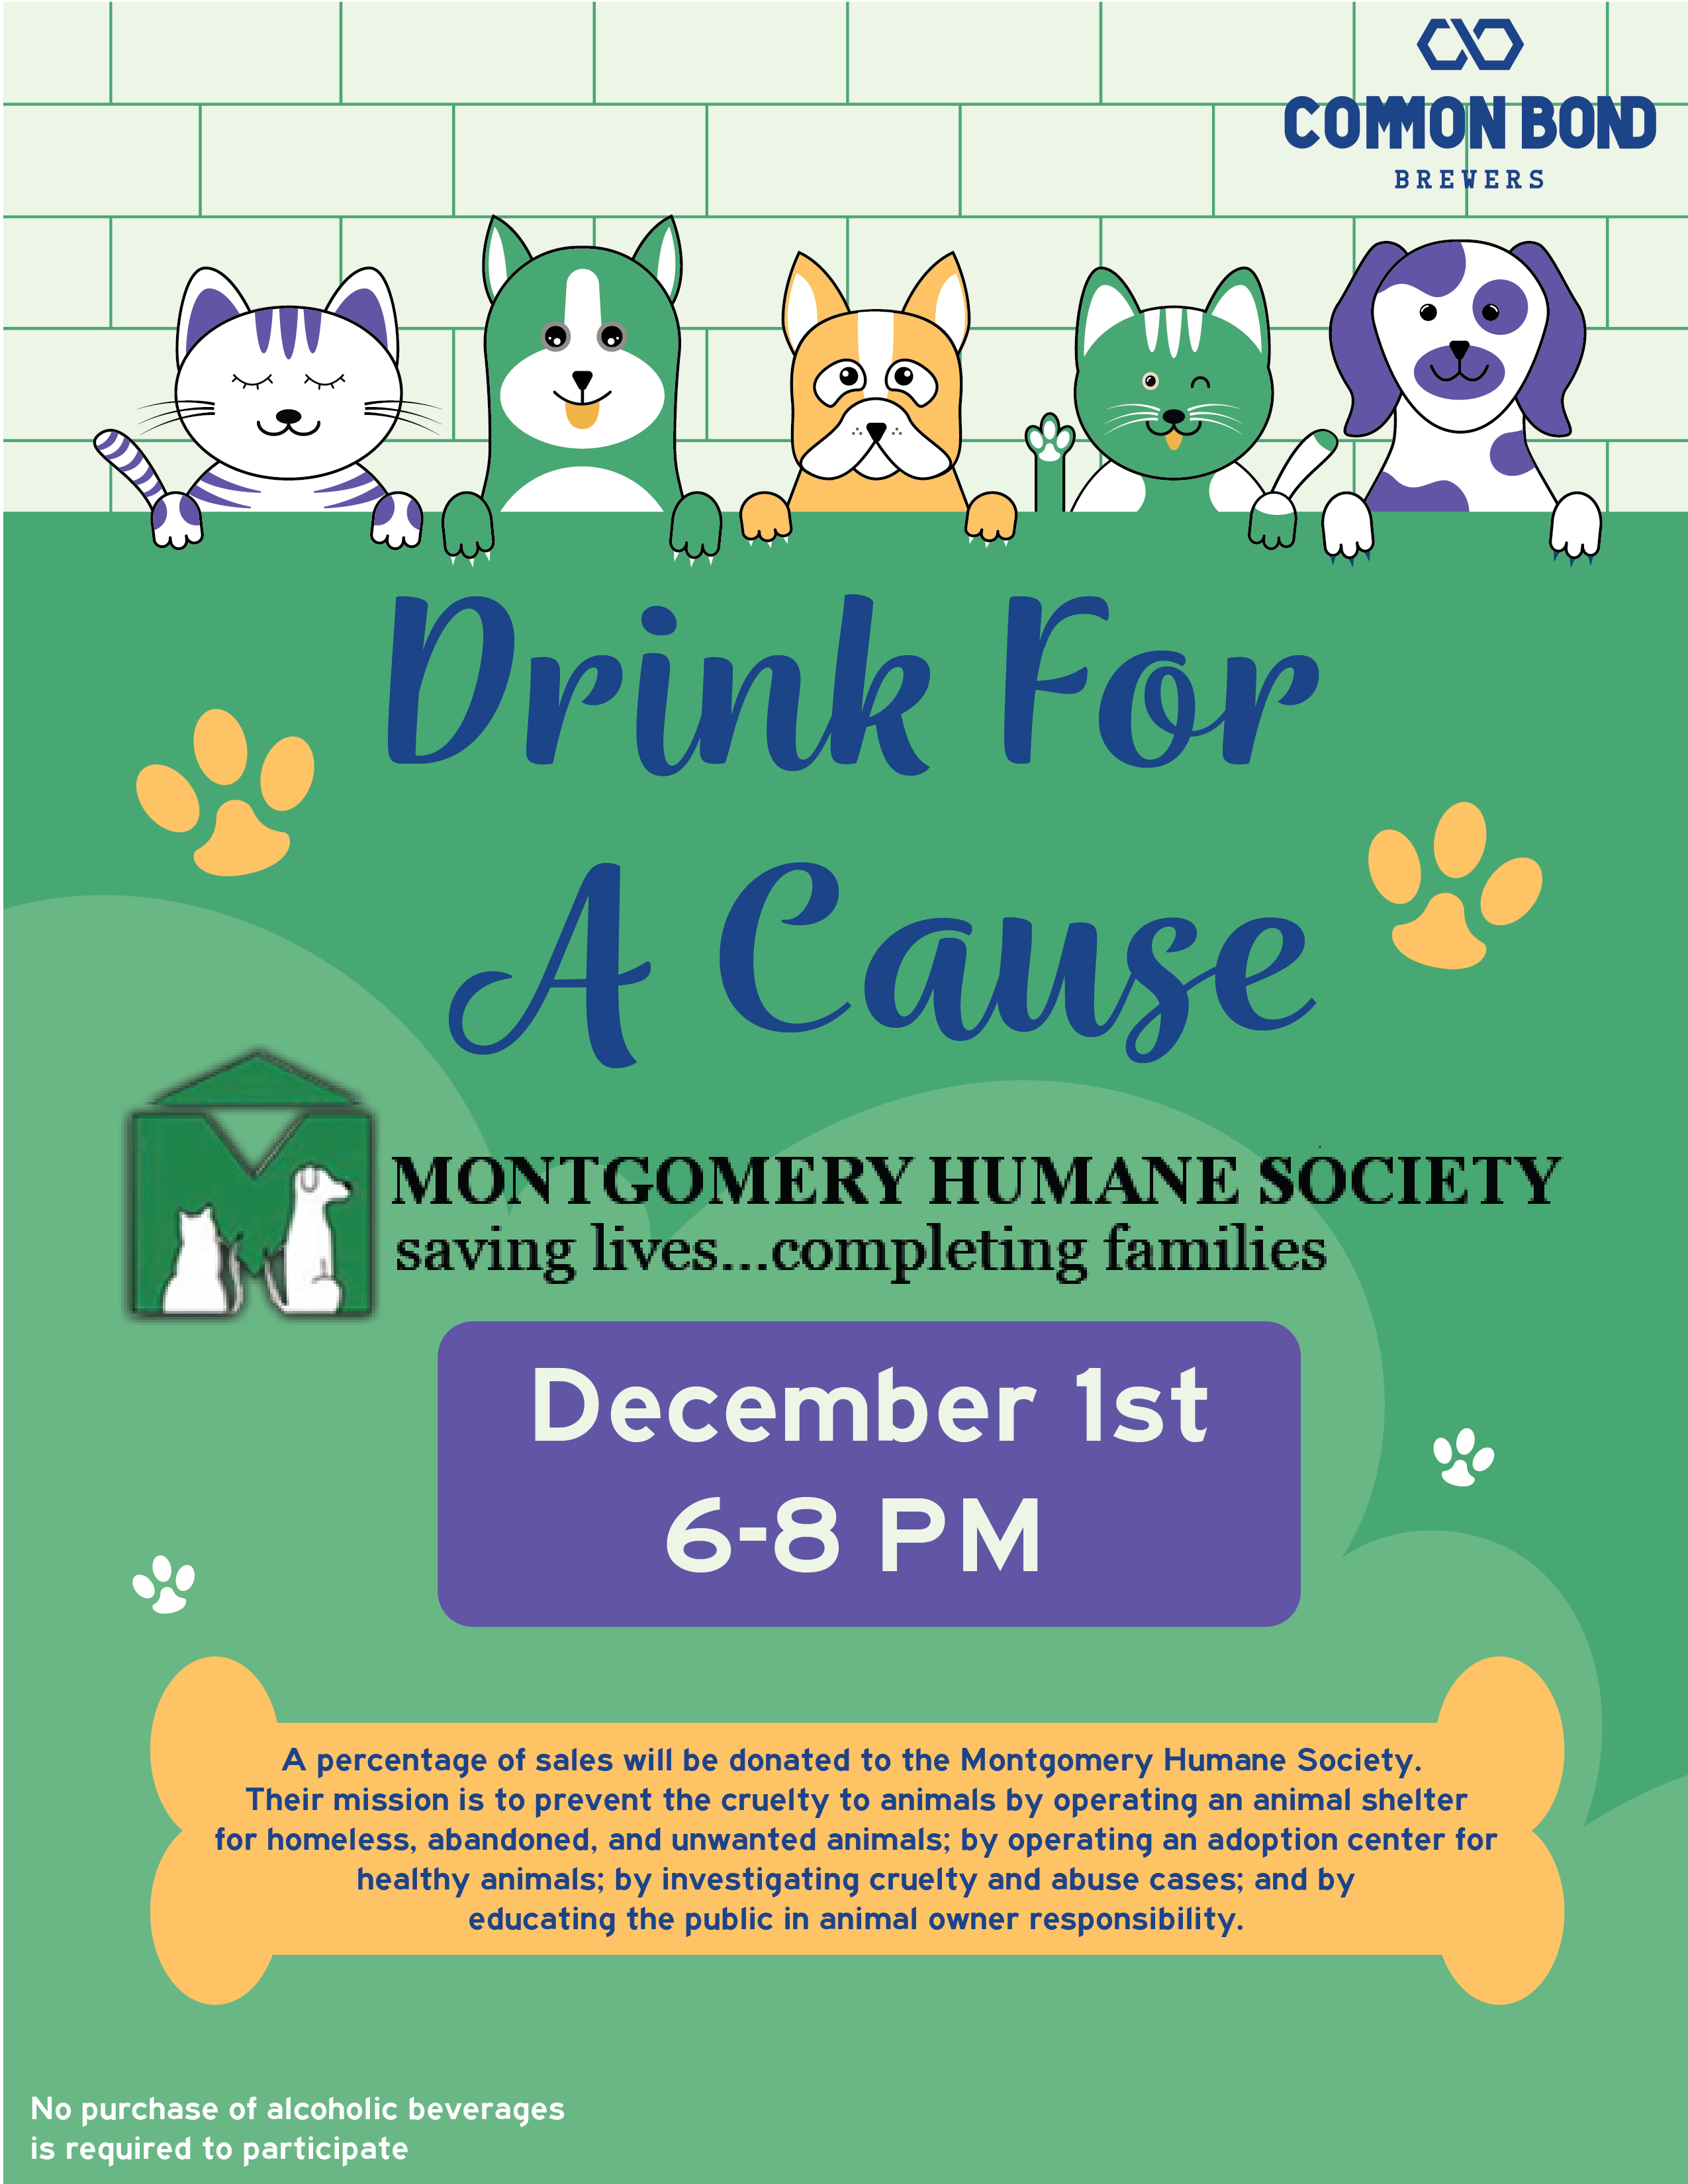 Drink for a Cause: Montgomery Humane Society